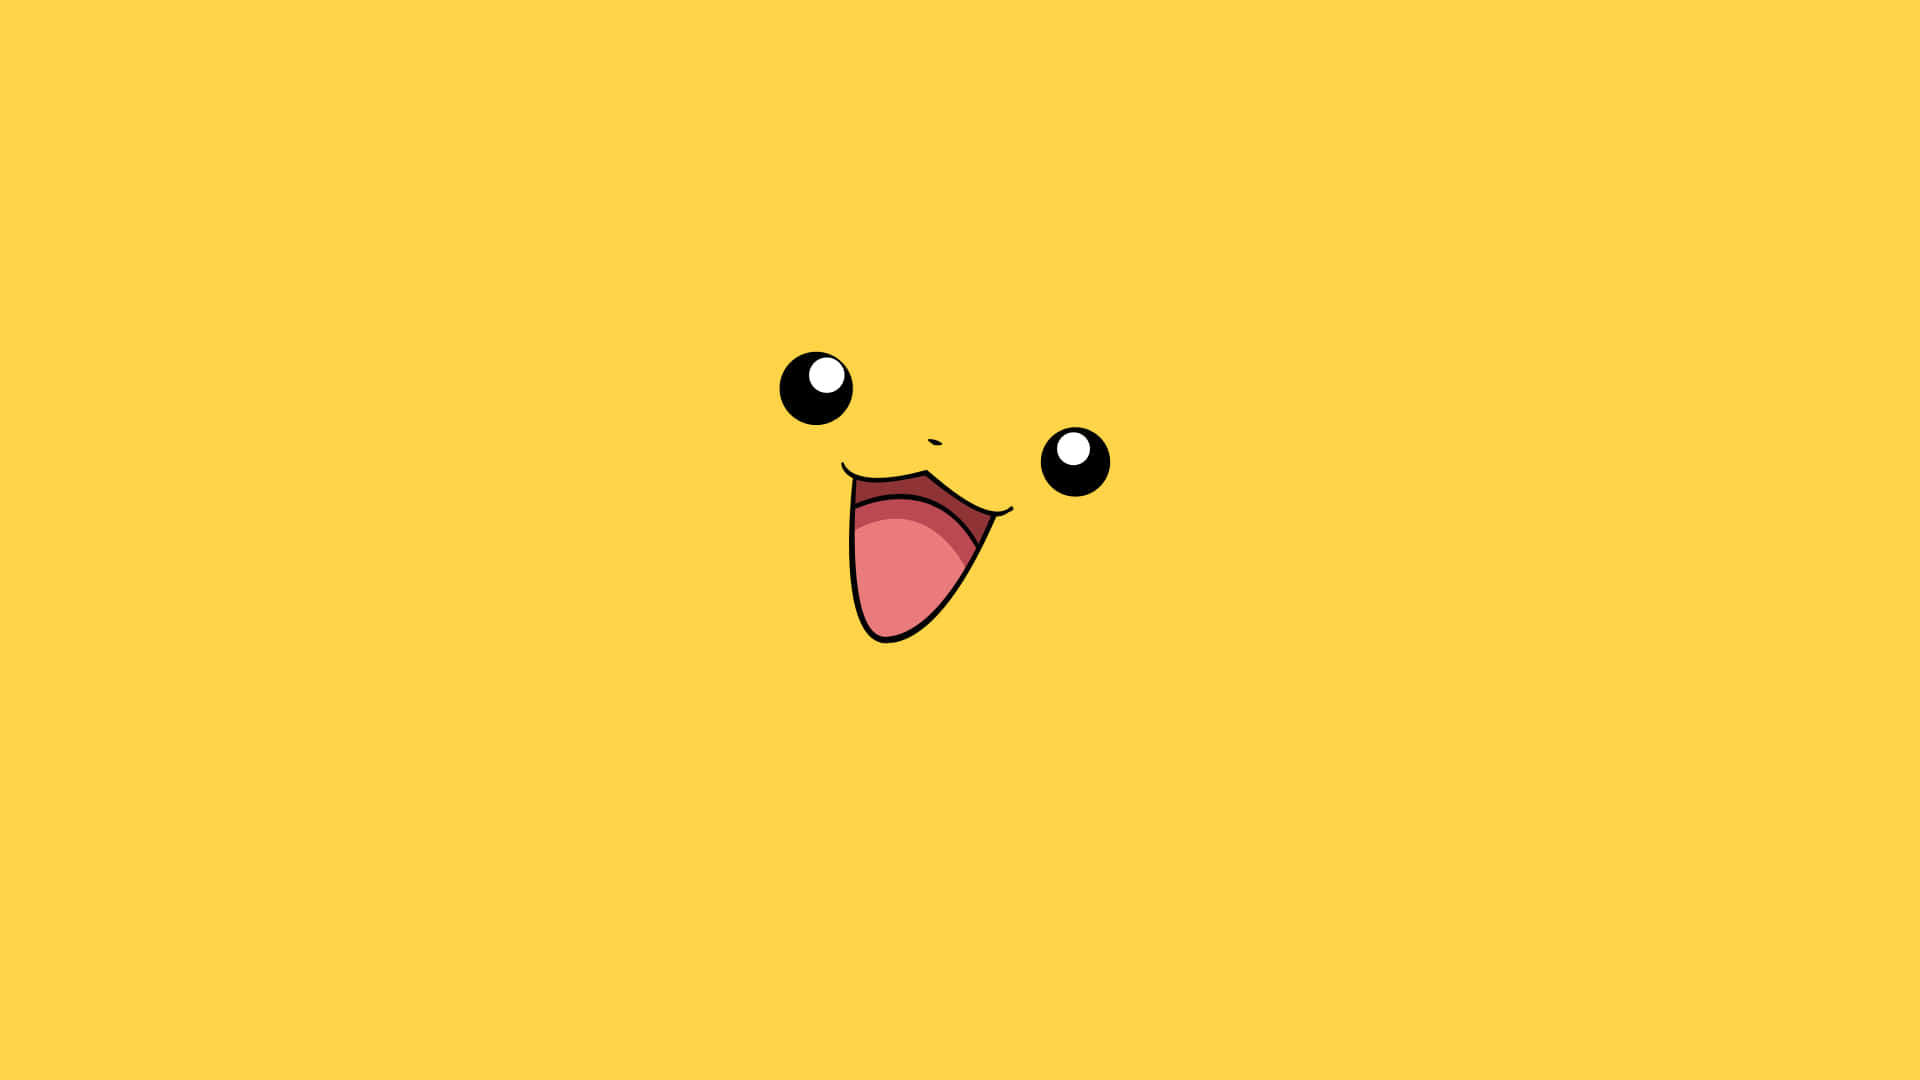 The cutest of them all - Pikachu!